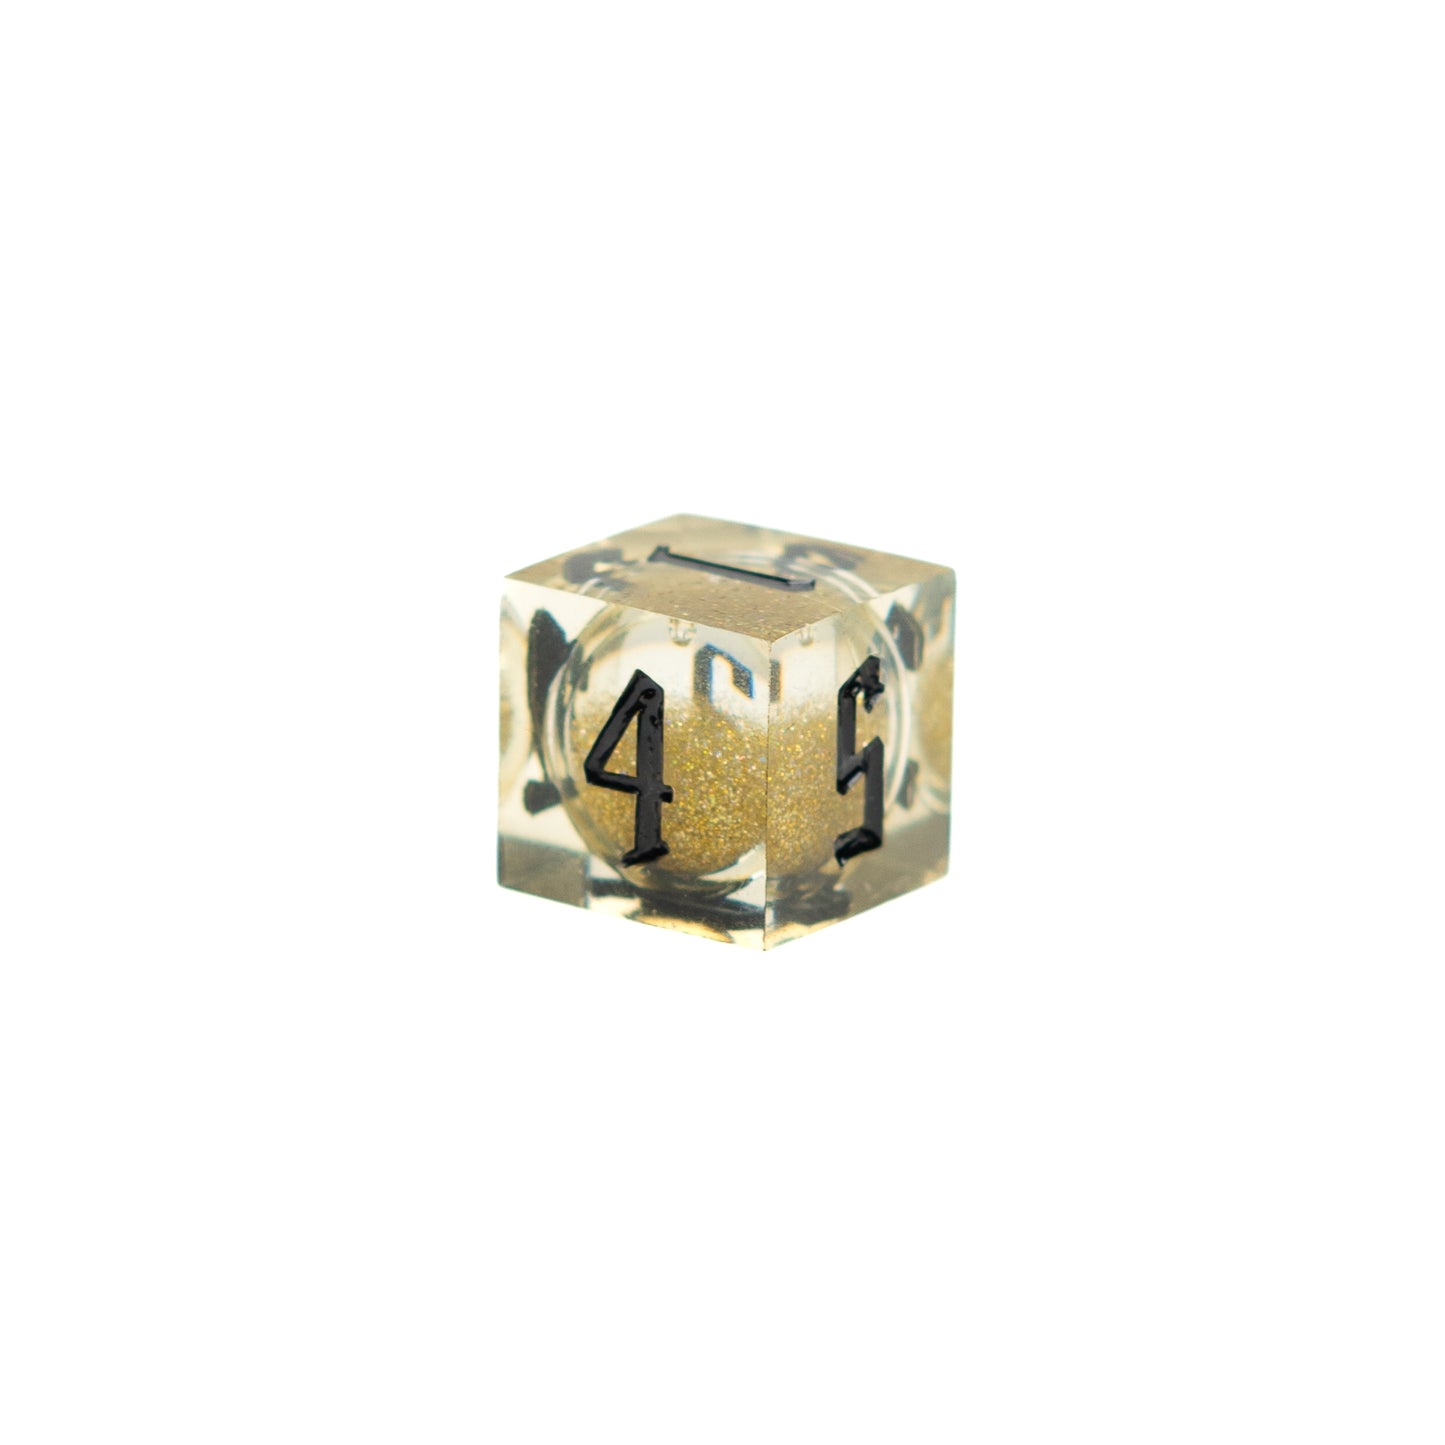 Roll Britannia Sharp Edge Resin Liquid Core Dungeons and Dragons D6 Dice with Gold Glitter Aesthetic